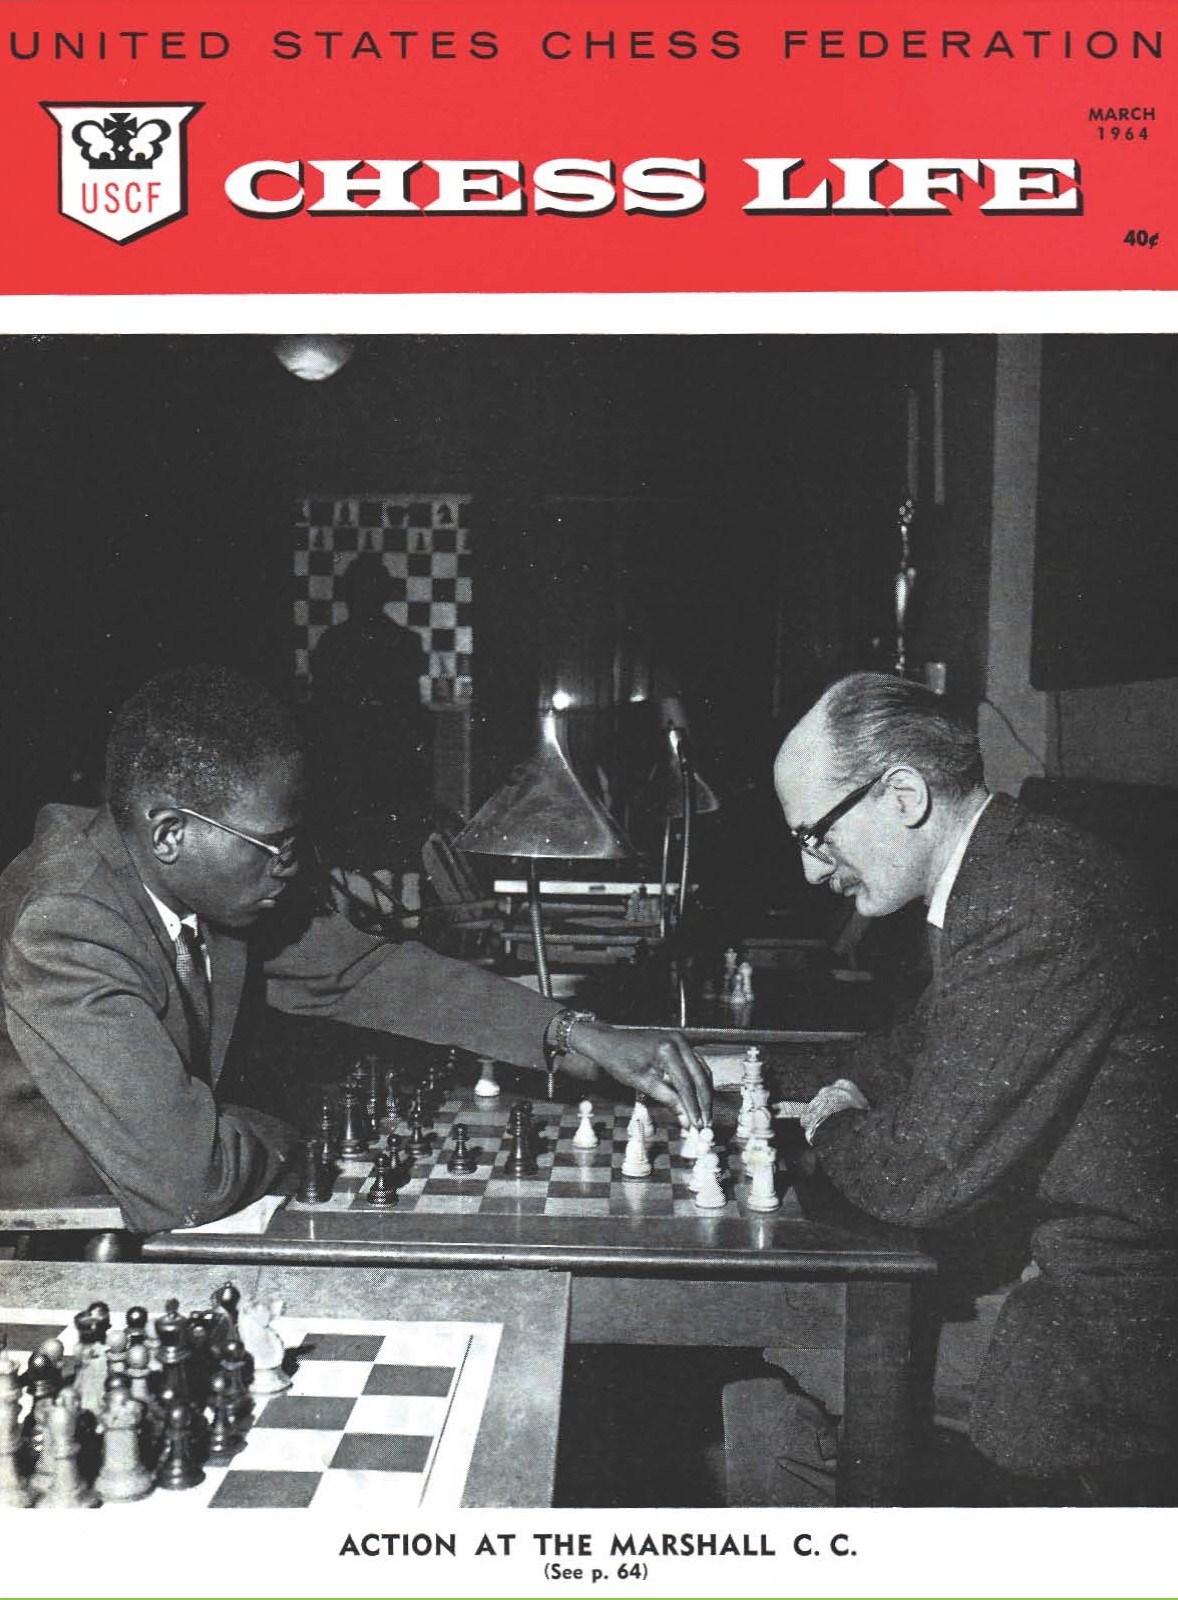 Walter Harris on the cover of the March 1964 U.S. Chess Life. Photo by Ebony magazine. 